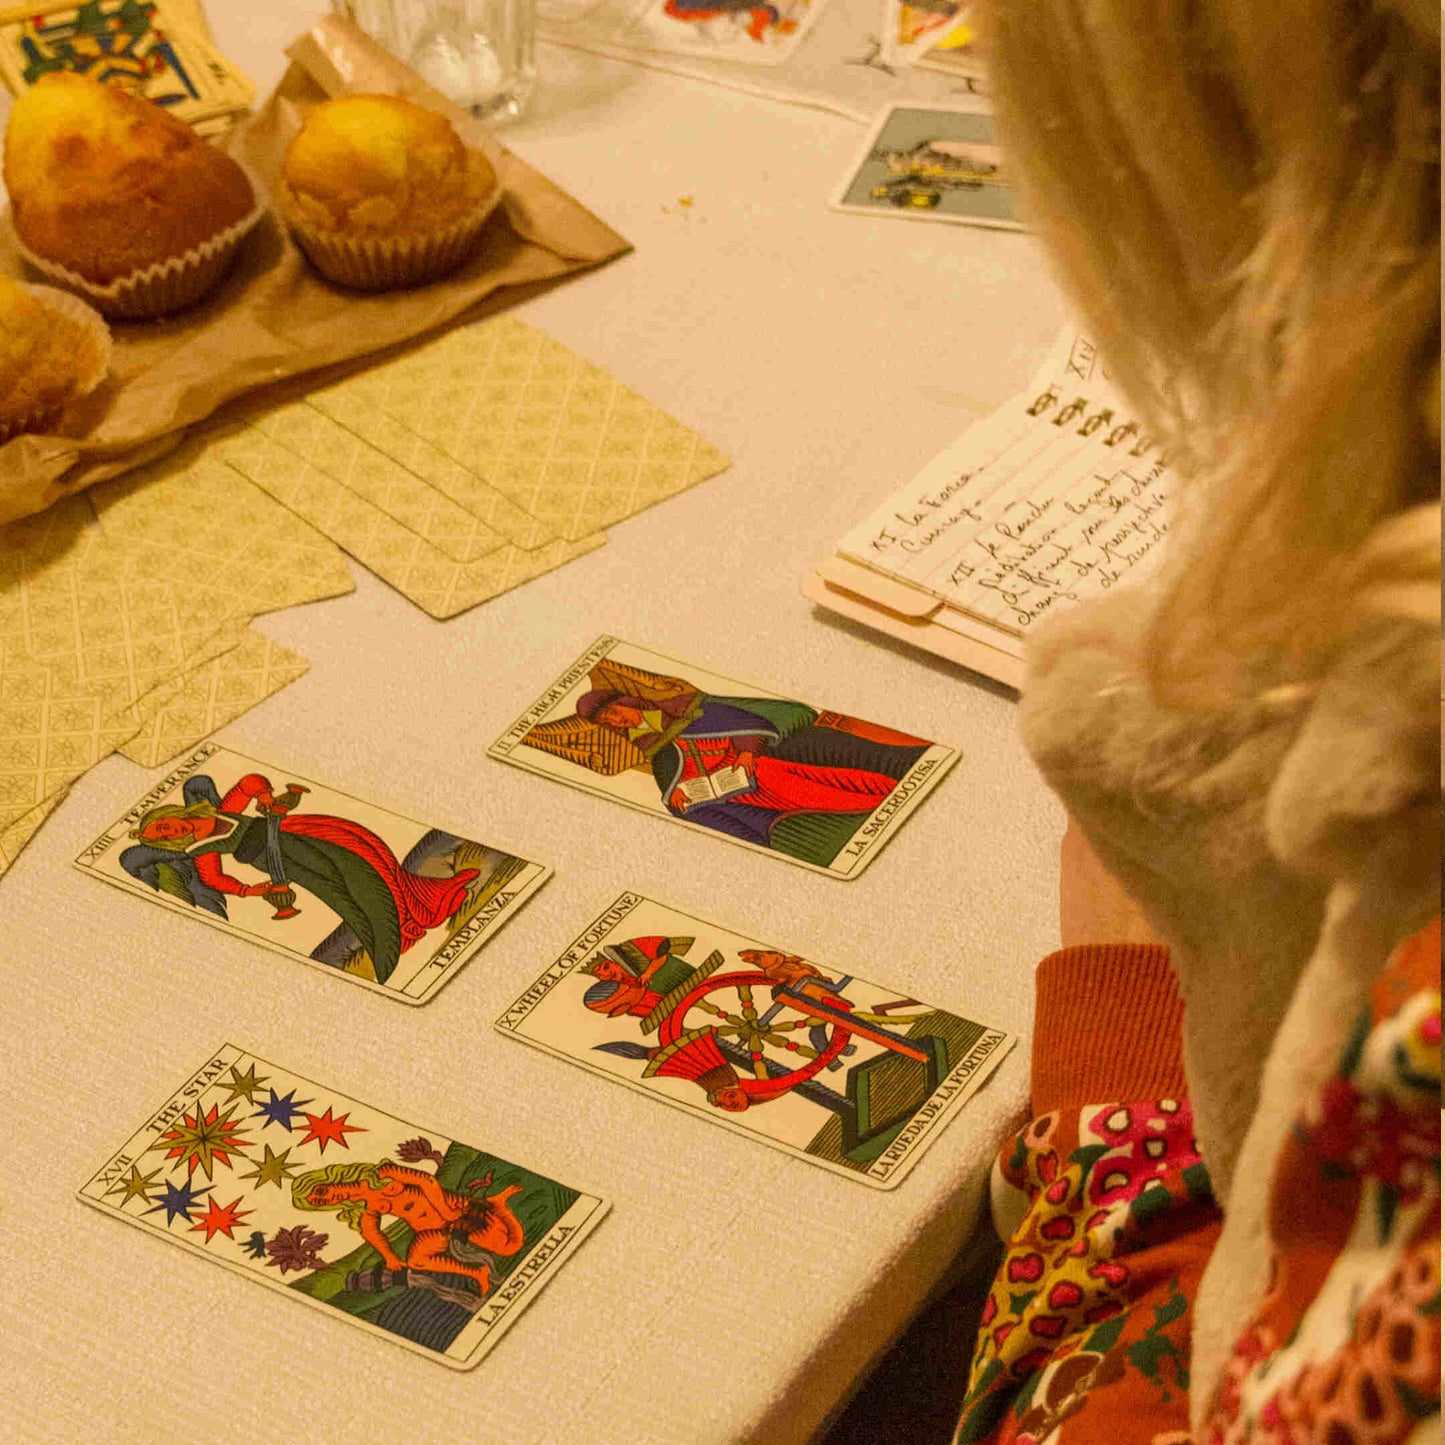 Book your Therapeutic Tarot Course - online or/and presencial in Barcelona